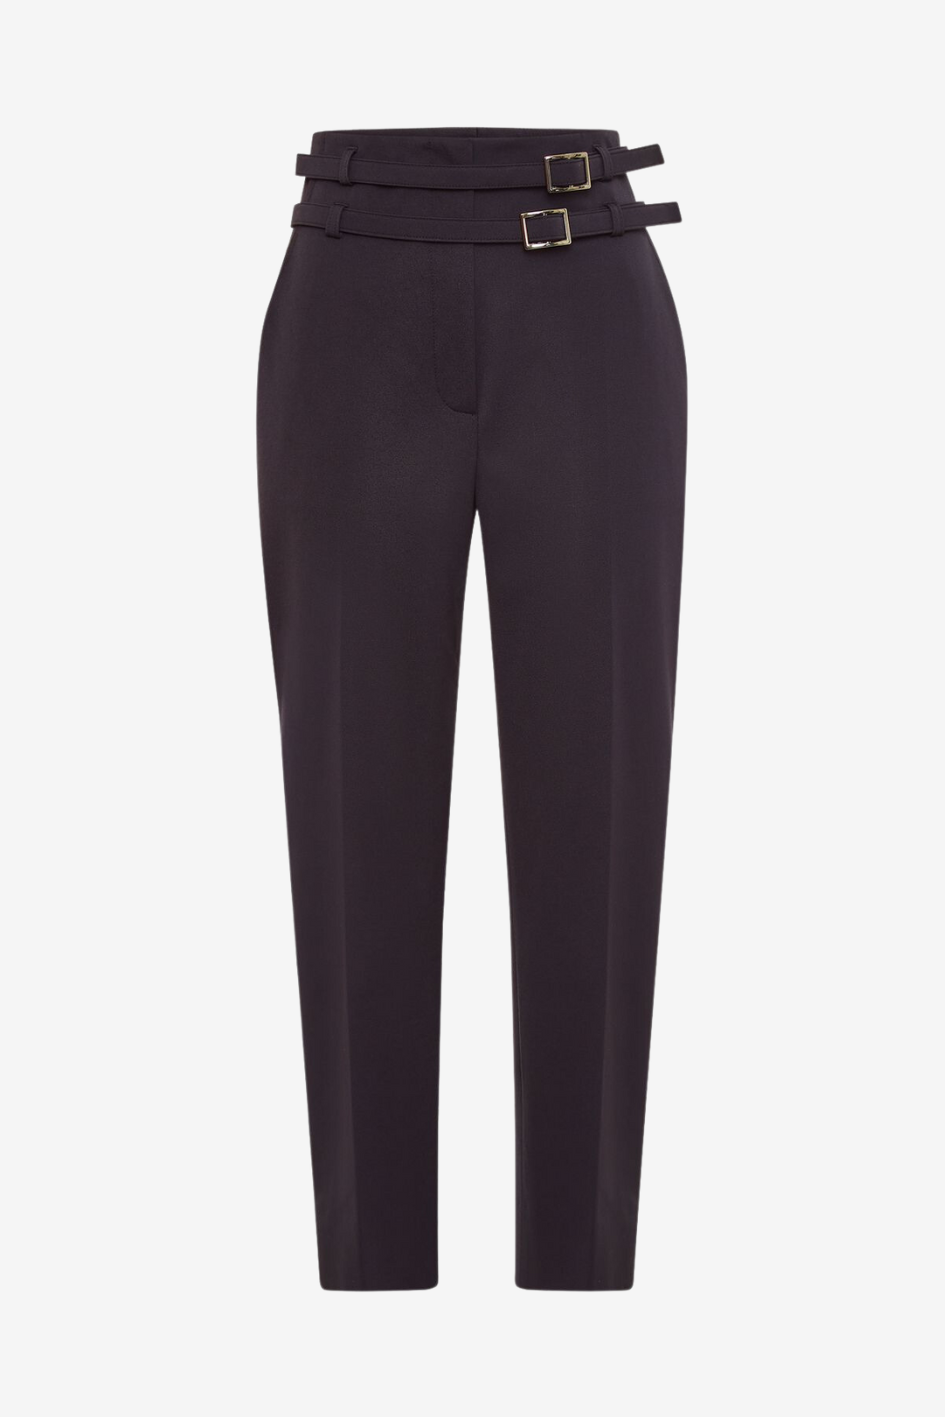 High-Waist Pants with Double Belts